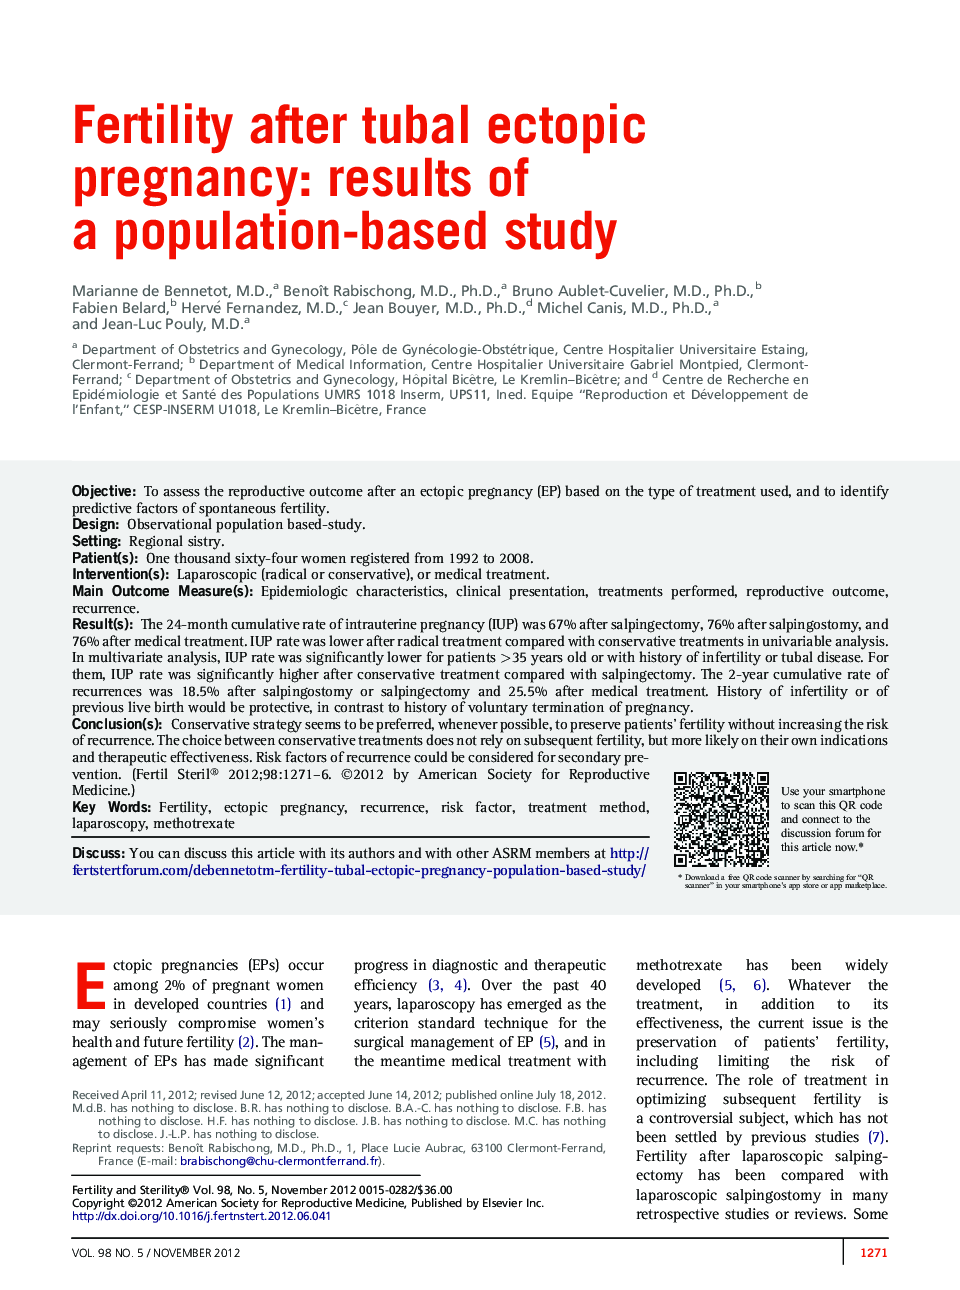 Fertility after tubal ectopic pregnancy: results of a population-based study